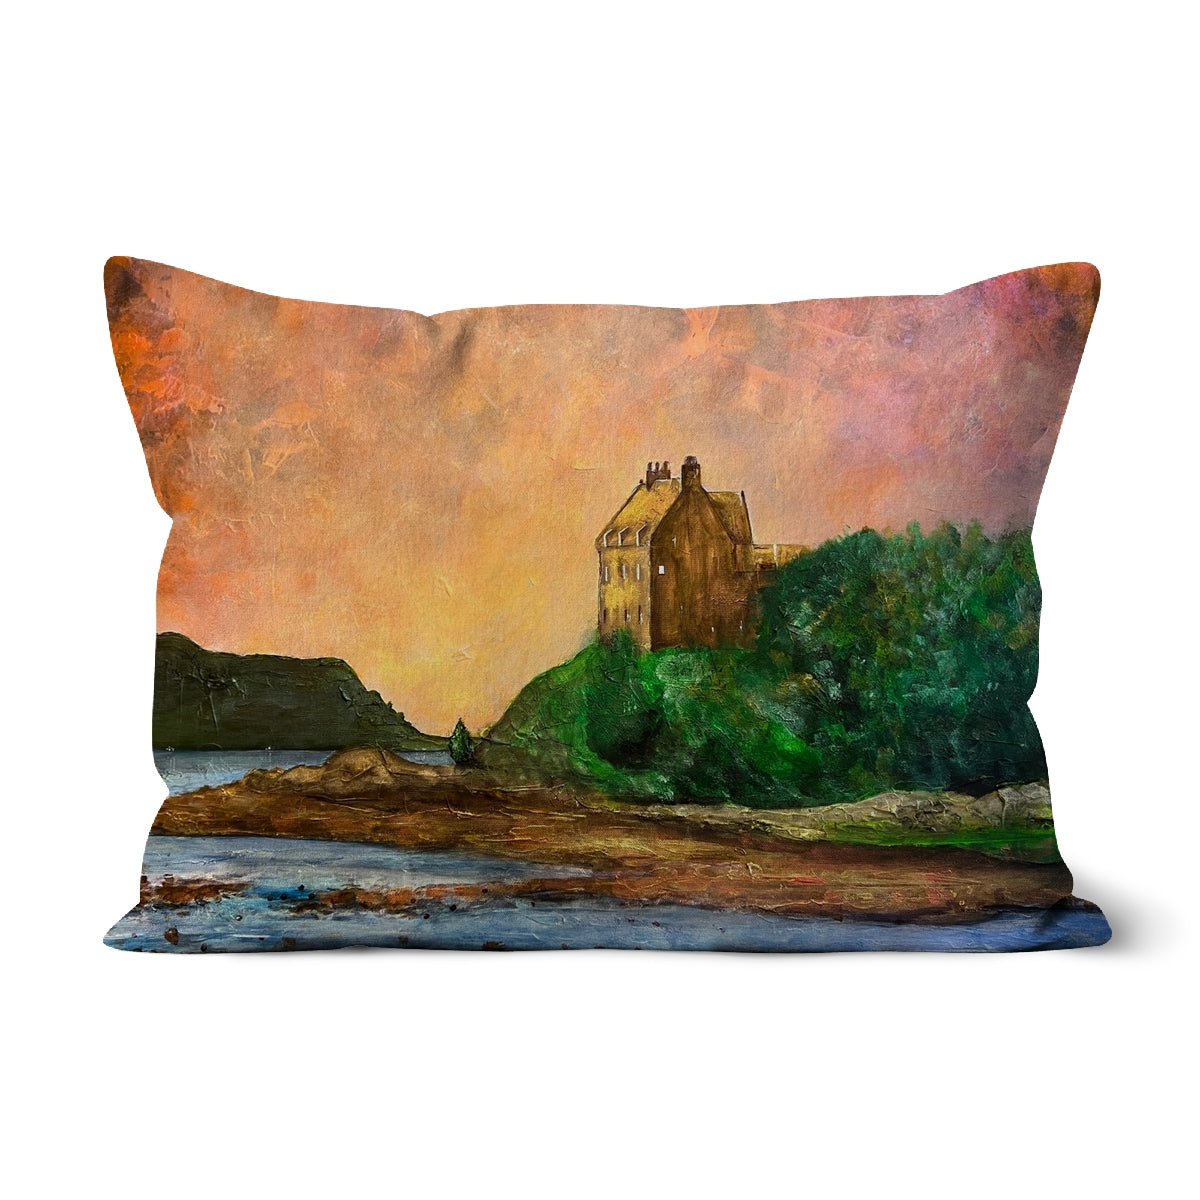 Duntrune Castle Art Gifts Cushion-Cushions-Historic & Iconic Scotland Art Gallery-Faux Suede-19"x13"-Paintings, Prints, Homeware, Art Gifts From Scotland By Scottish Artist Kevin Hunter